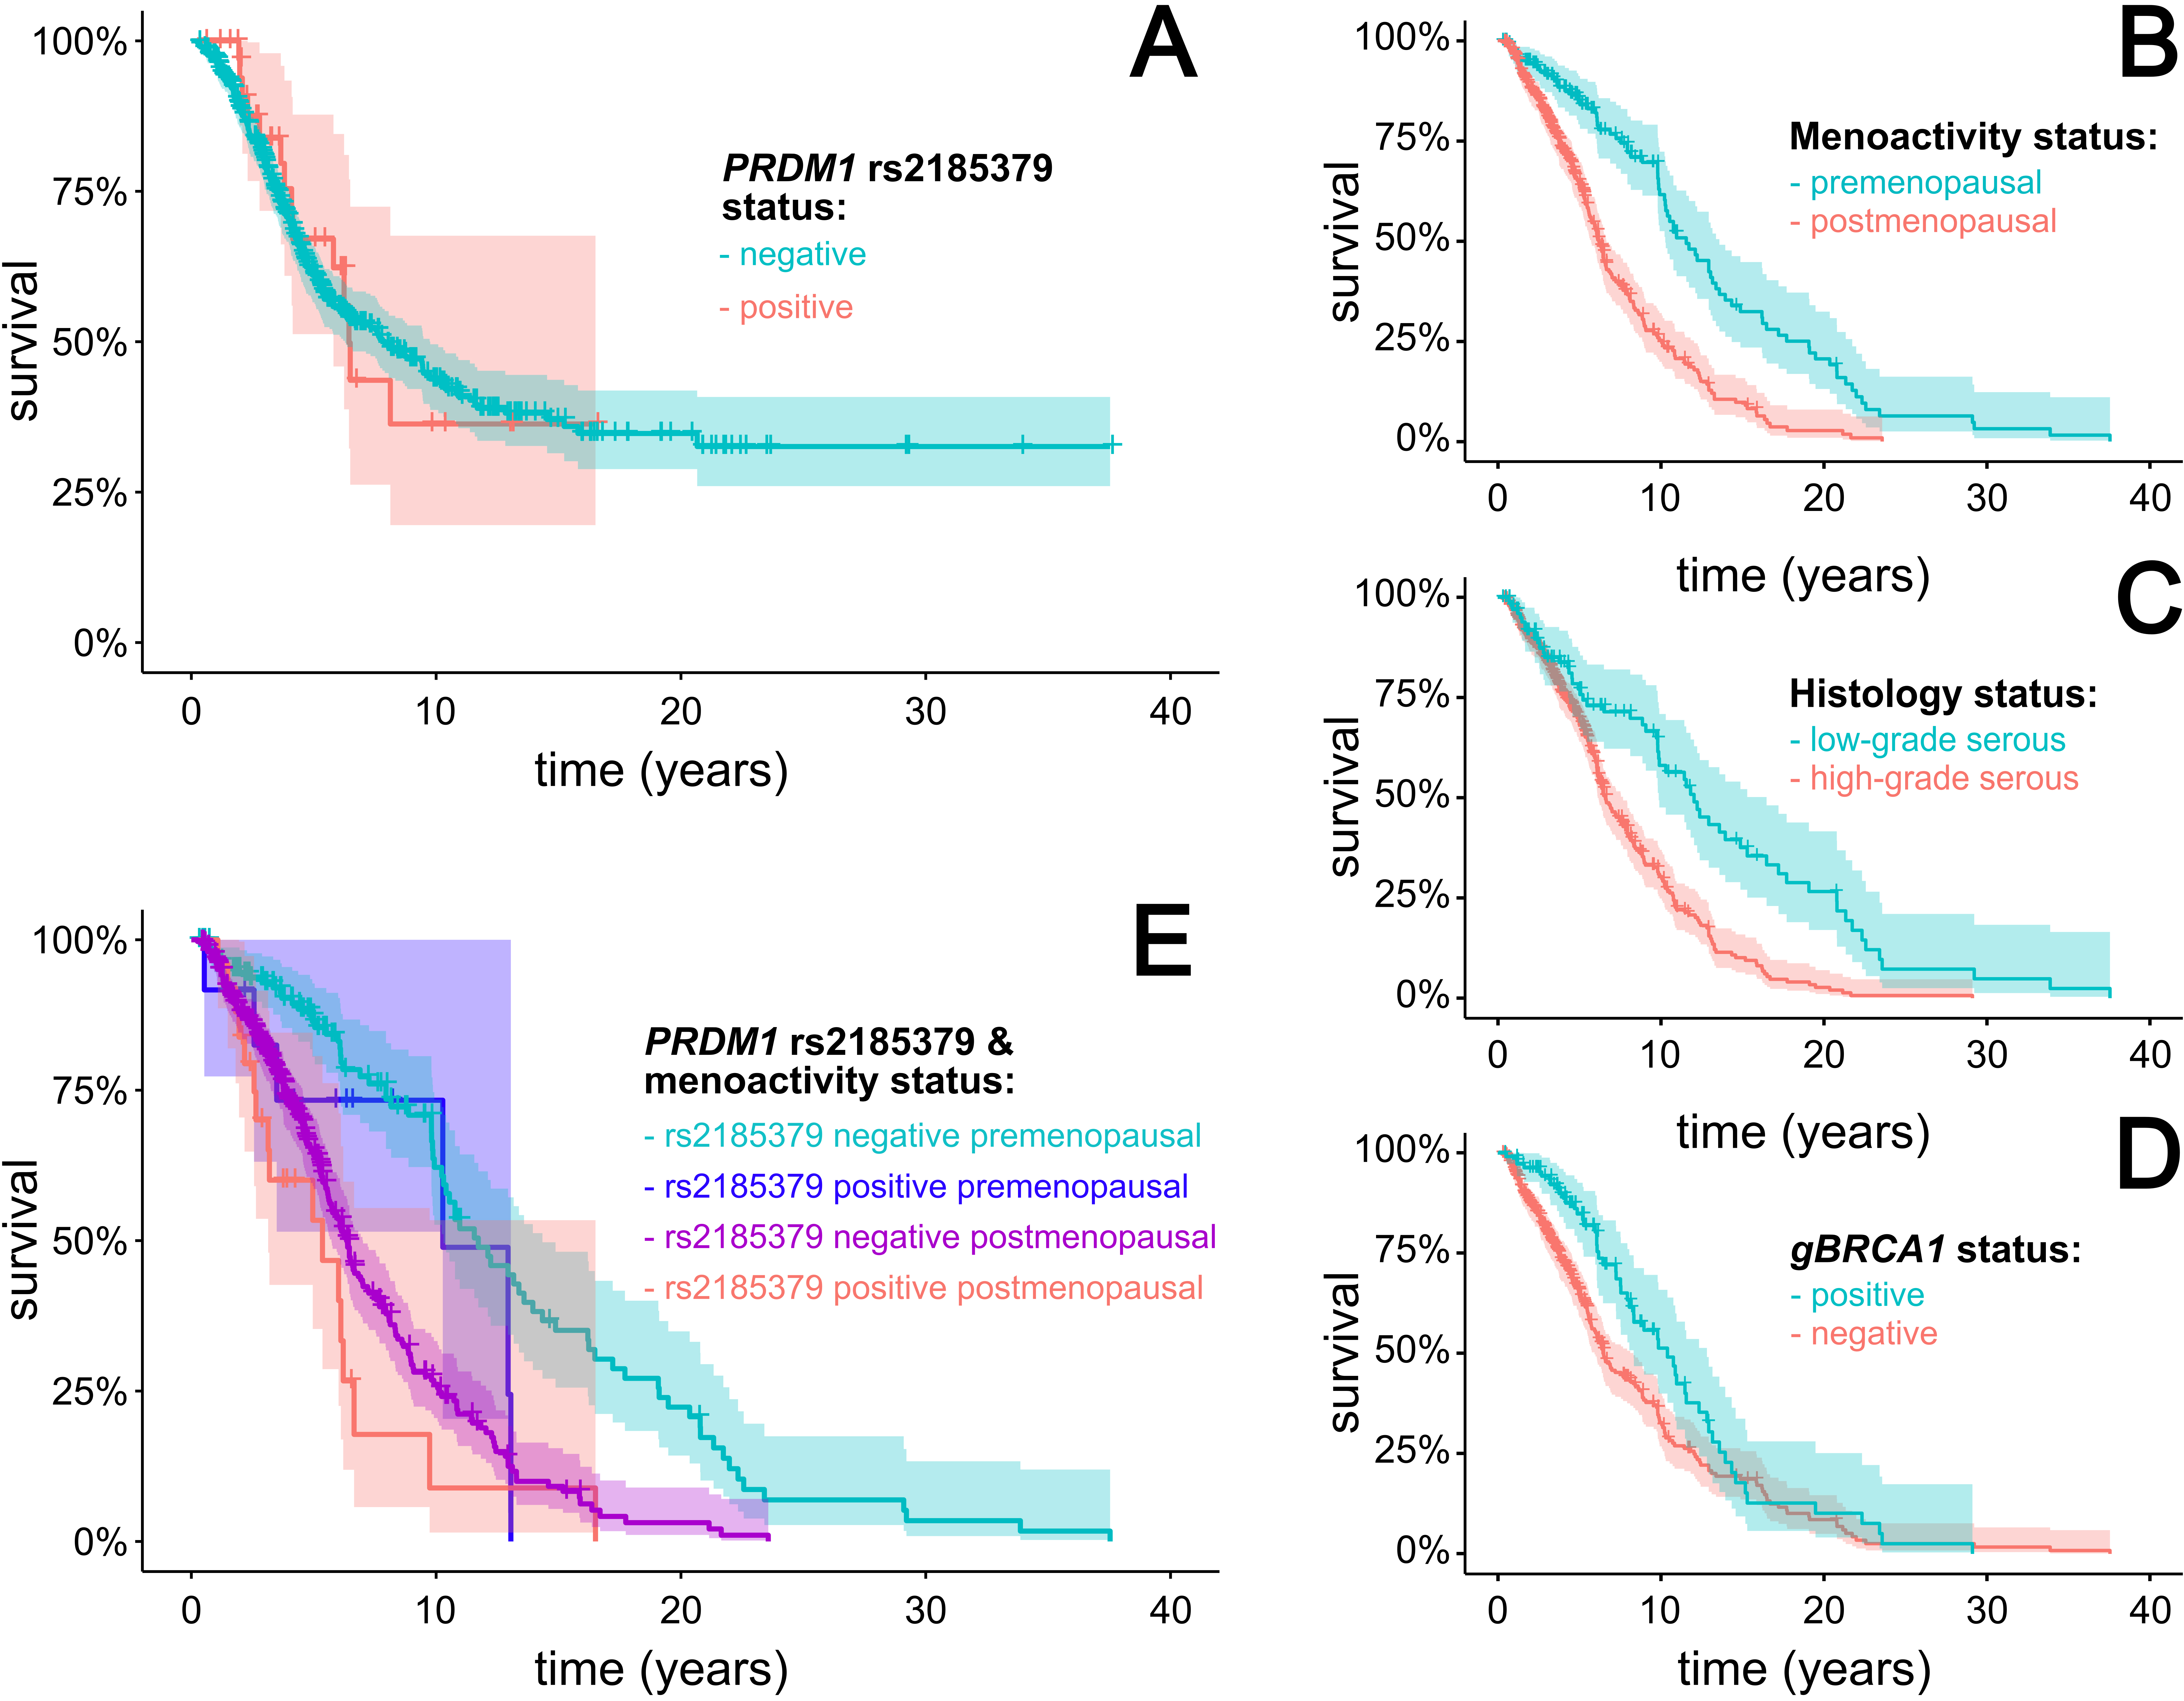 The effect of monitored variables on survival of patients diagnosed with advanced OC. Figure 1 shows univariate survival analysis of the PRDM1 rs2185379 status (Fig. 1A), menoactivity status (Fig. 1B), OC histology (Fig. 1C), germline BRCA1 mutation status (Fig. 1D), and multivariate analysis interrogating the effect of PRDM1 rs2185379 and the menoactivity status (Fig. 1E).